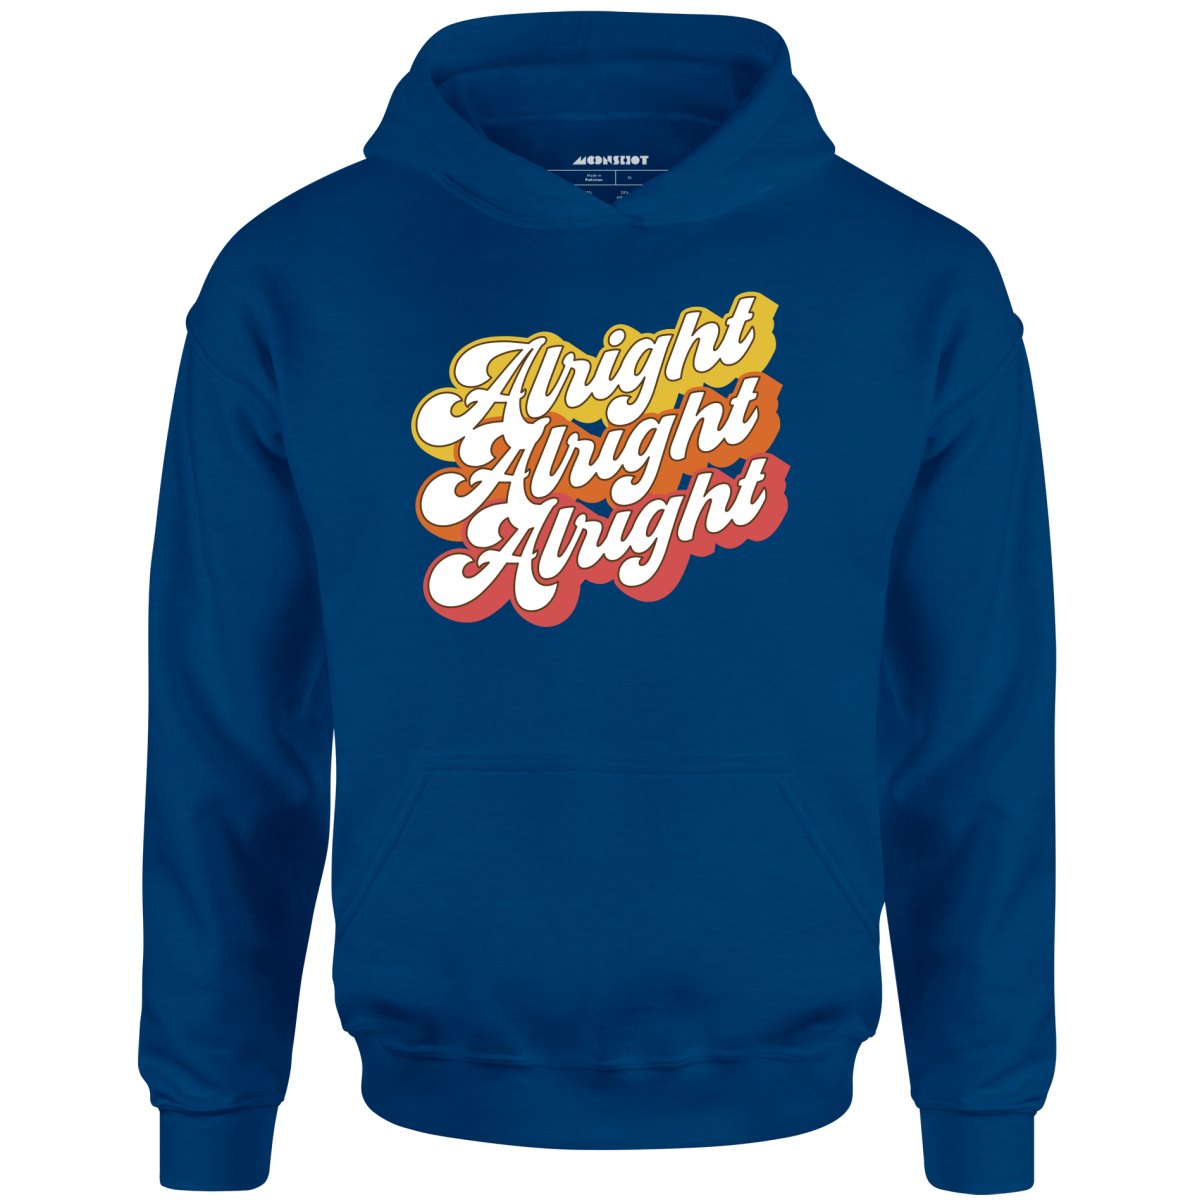 Alright Alright Alright - Unisex Hoodie